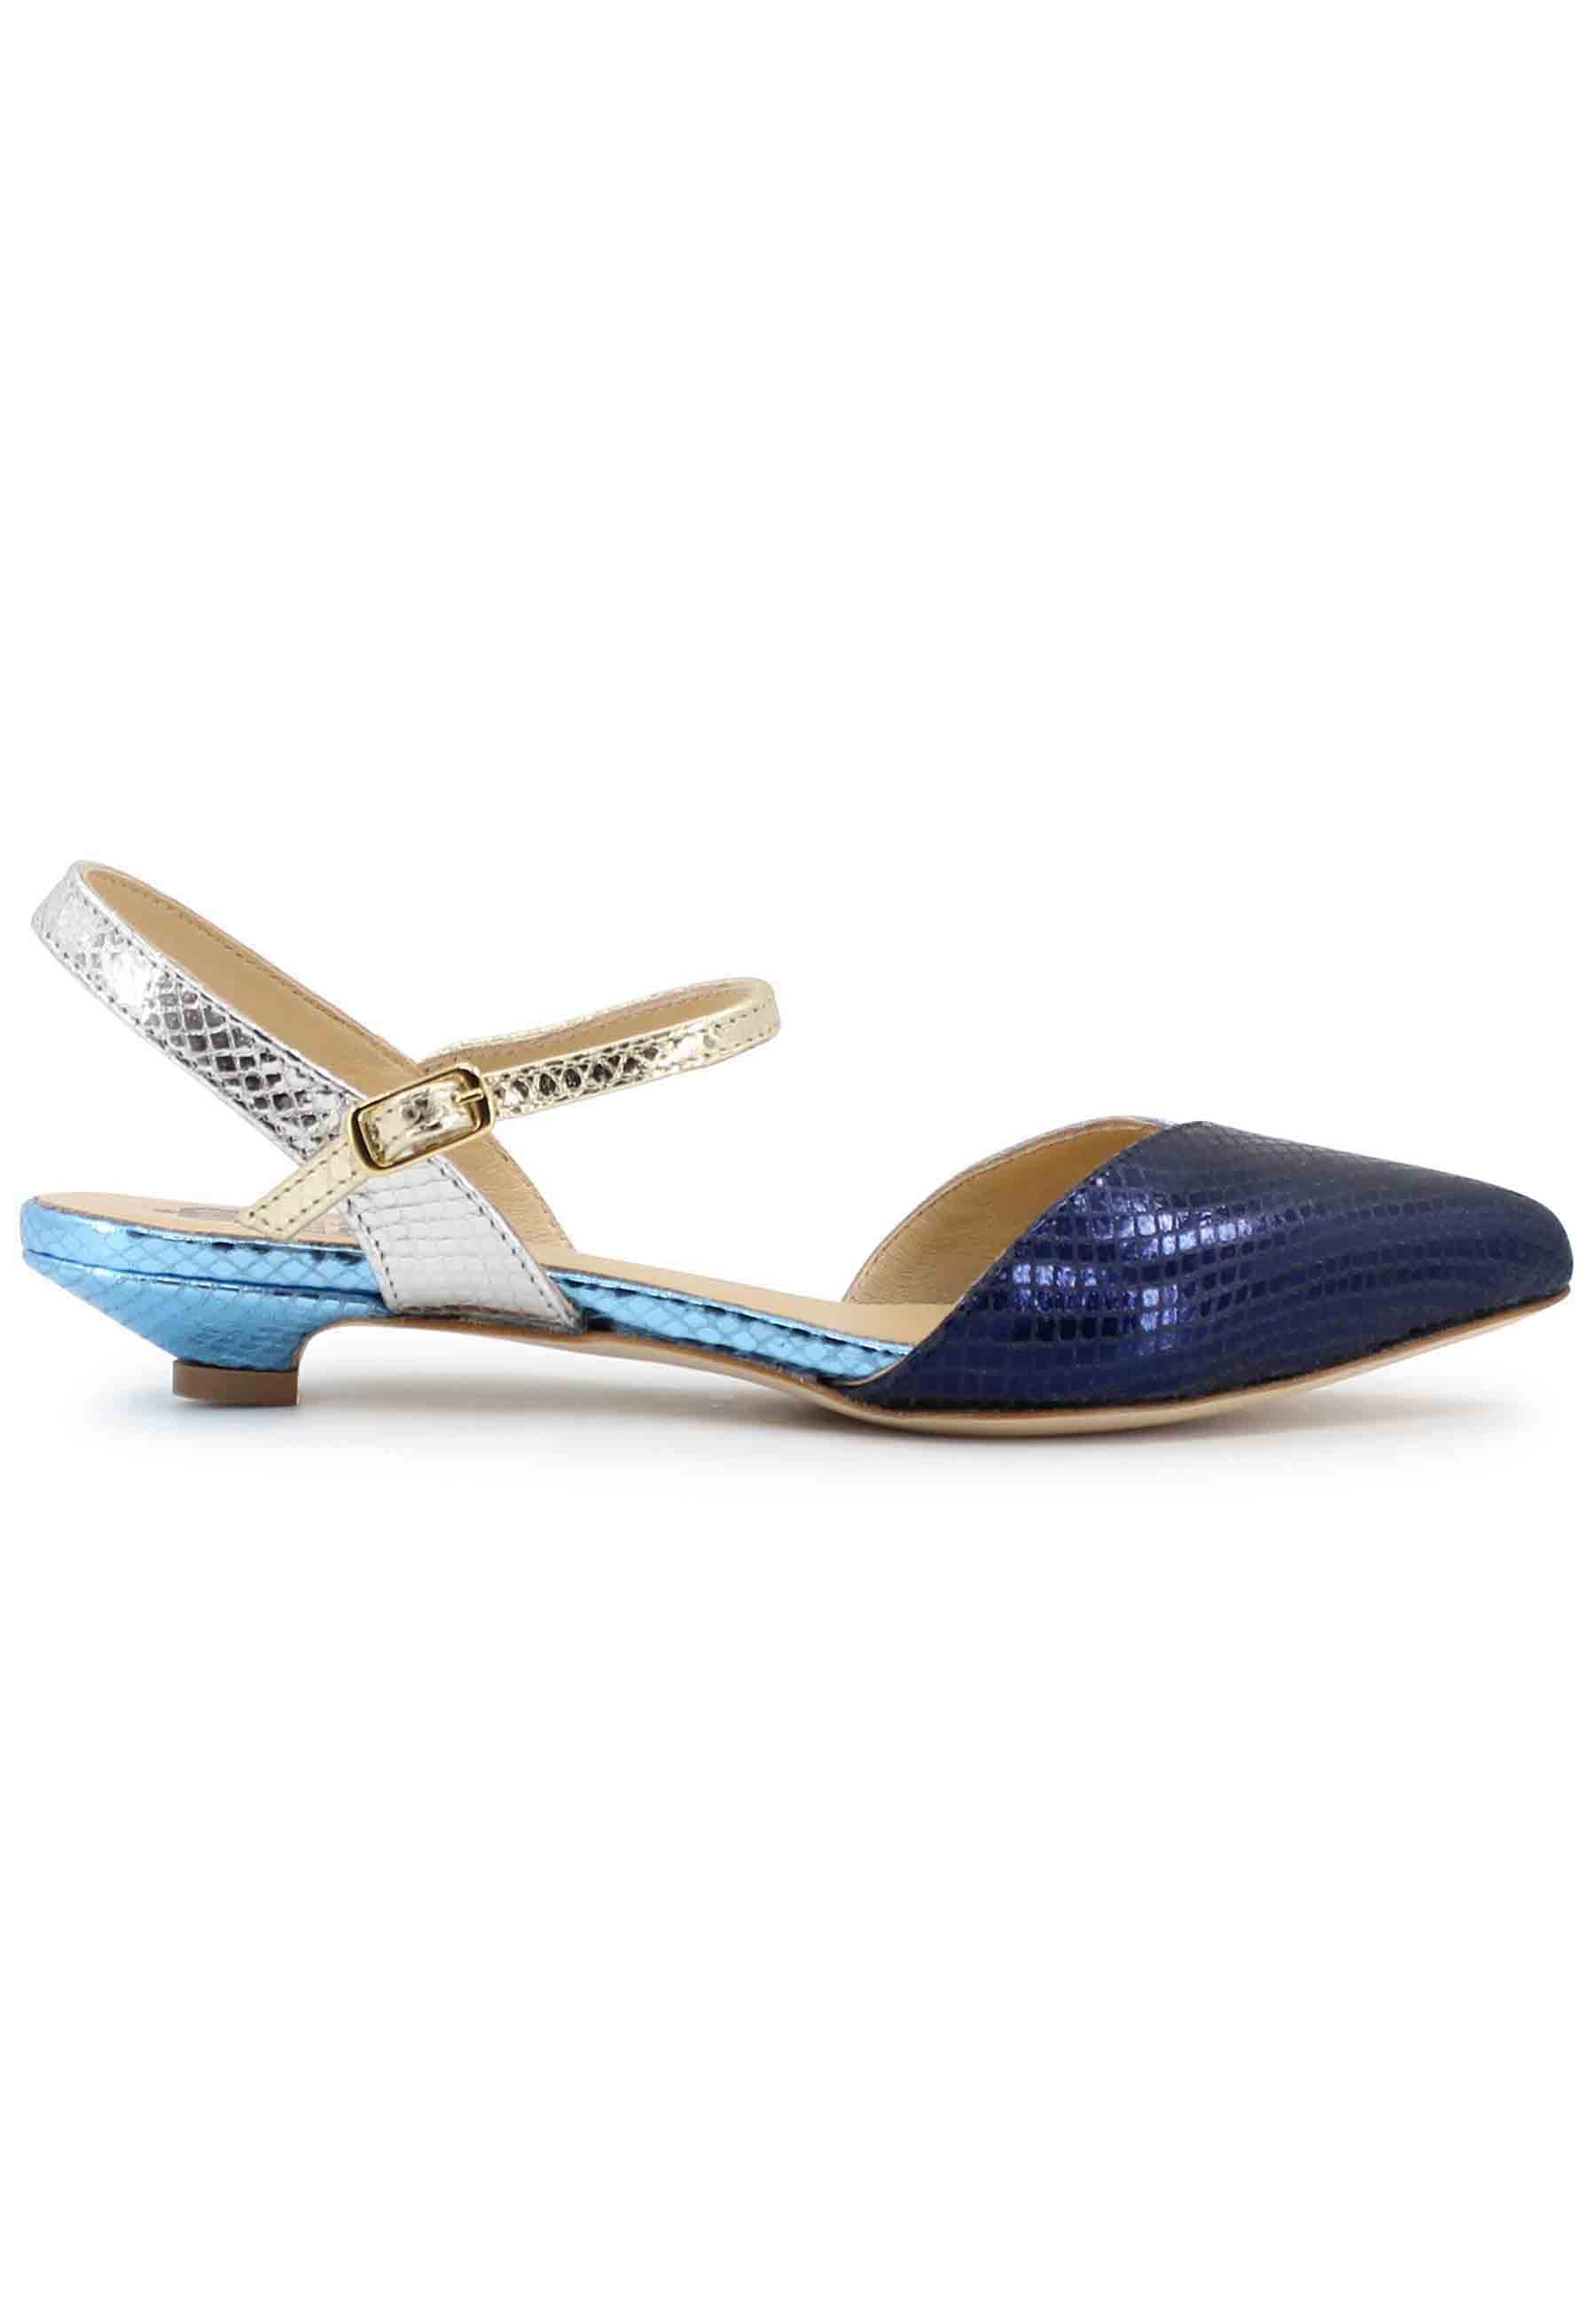 Women's flat sandals in blue laminated leather, closed toe with ankle strap